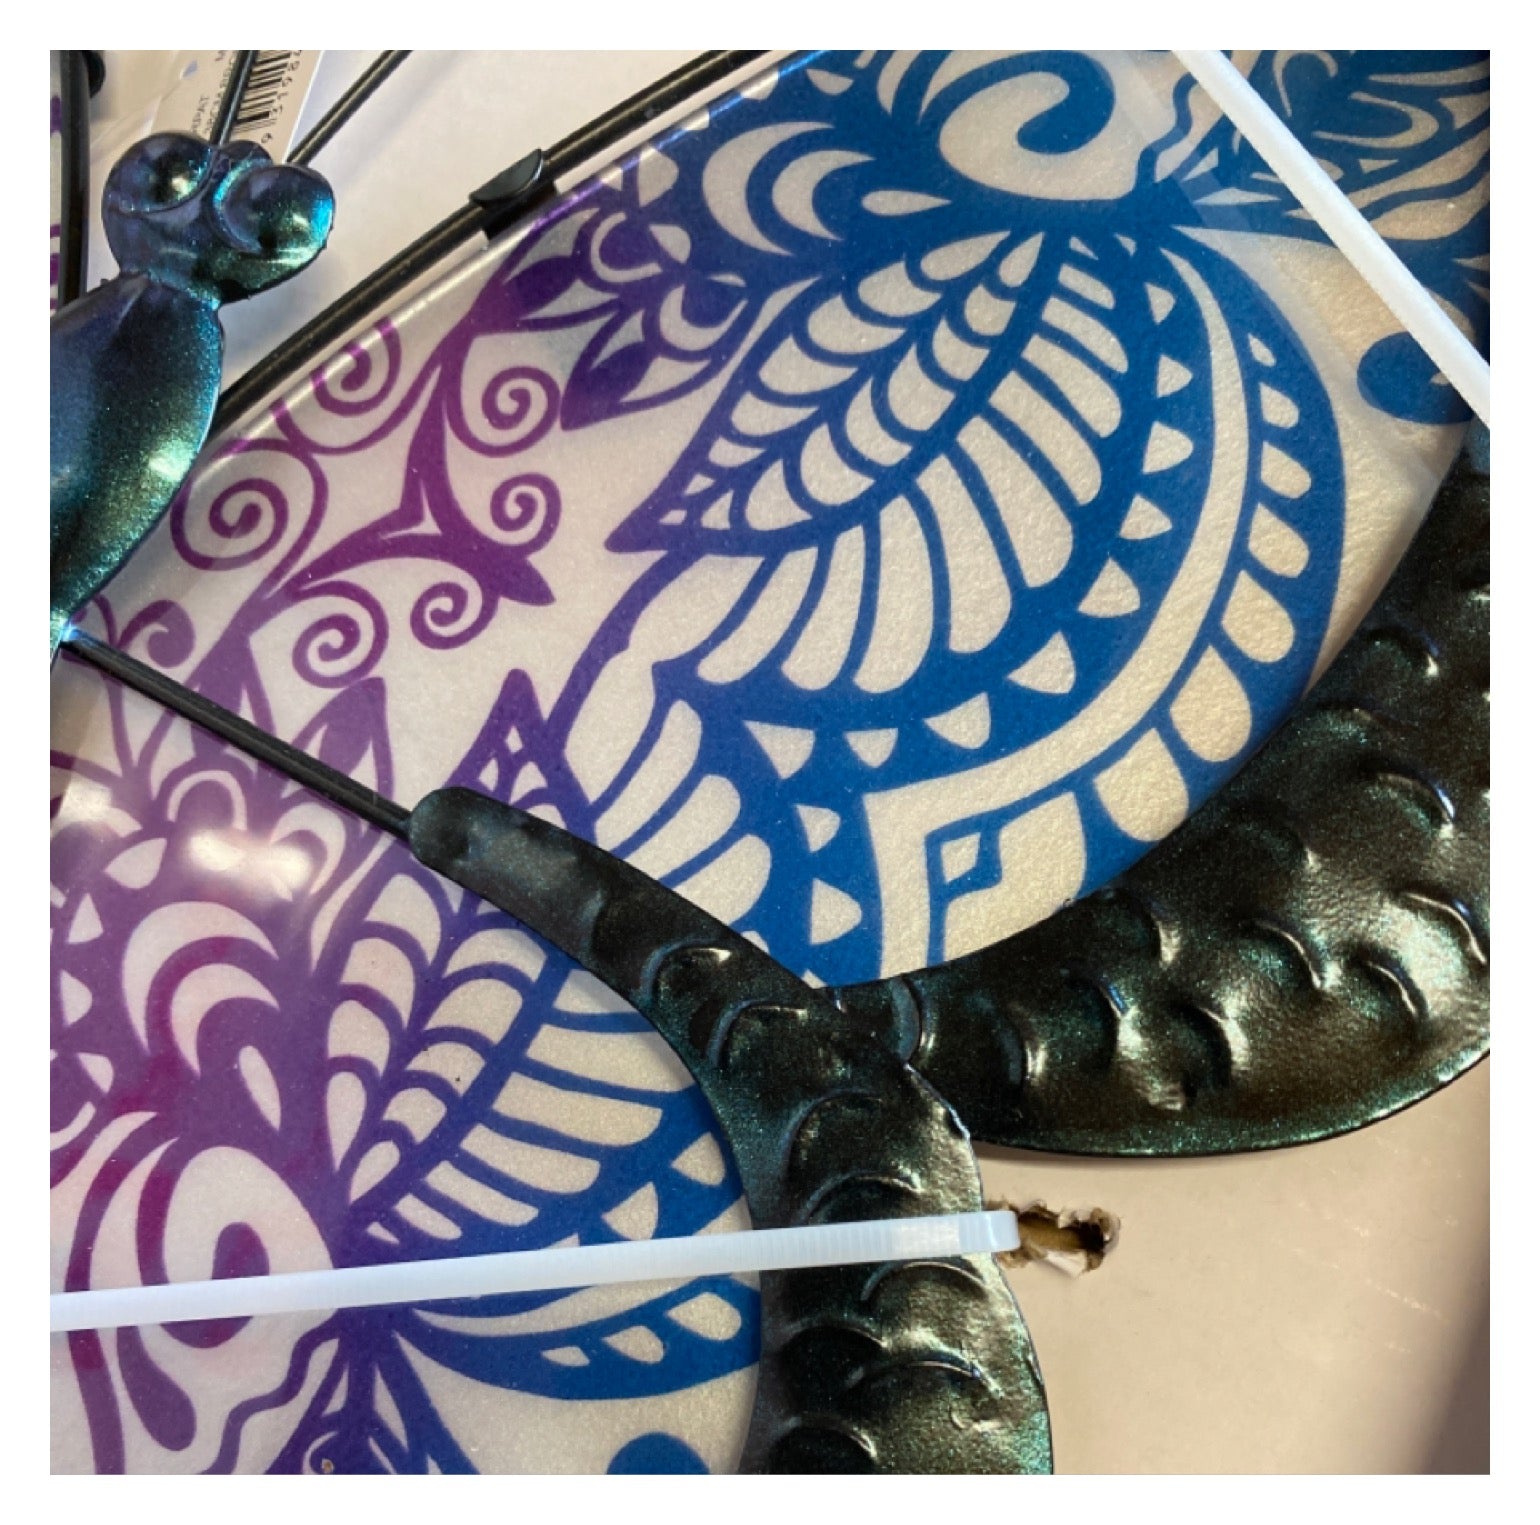 Butterfly Purple Blue Delight Wall Art Décor - The Renmy Store Homewares & Gifts 